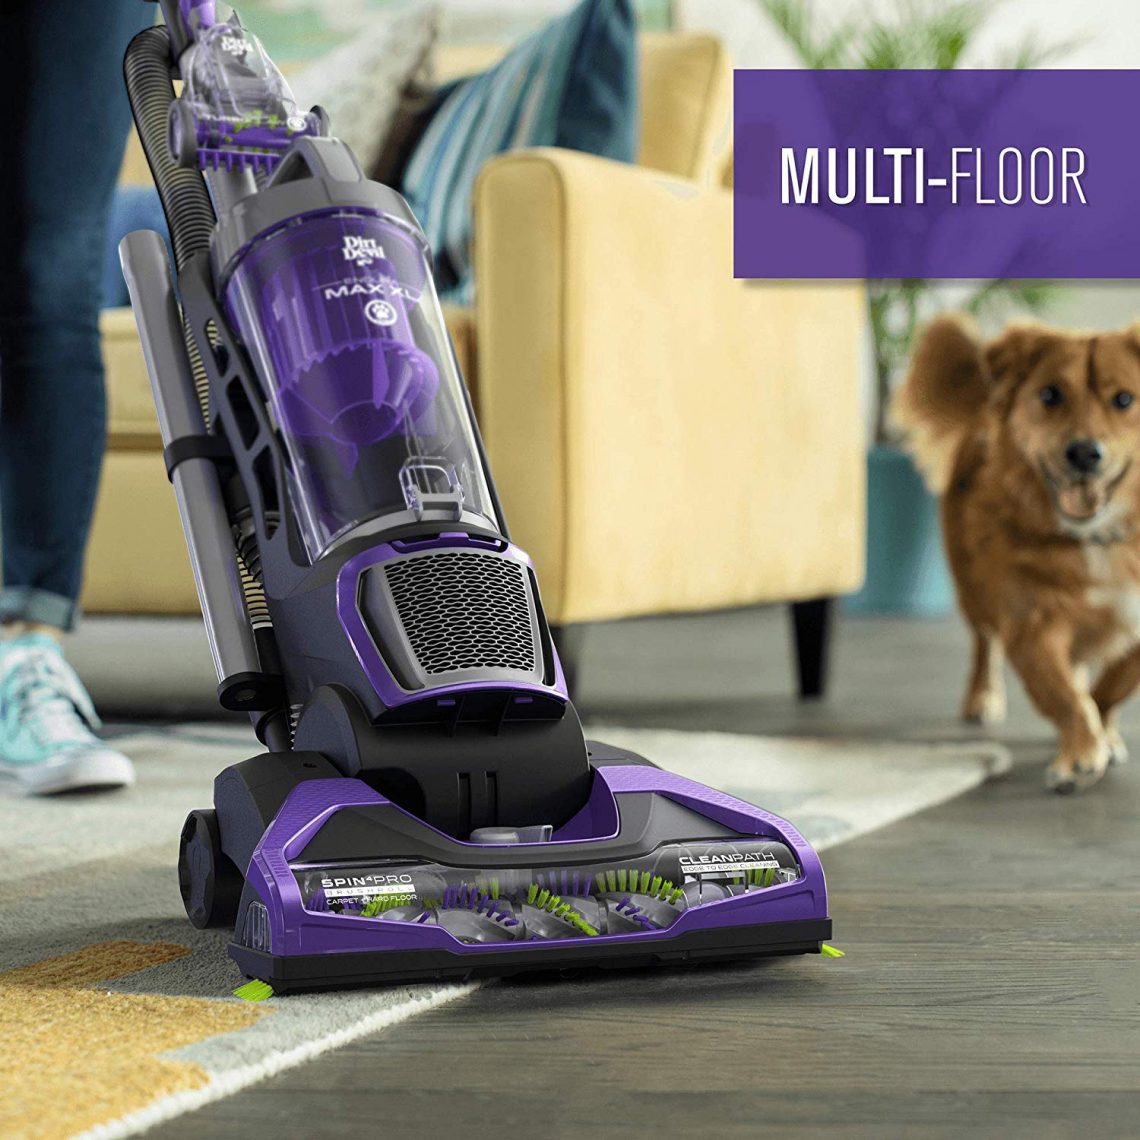 How do you use the Dirt Devil Power Max Pet Bagless Upright Vacuum Cleaner?